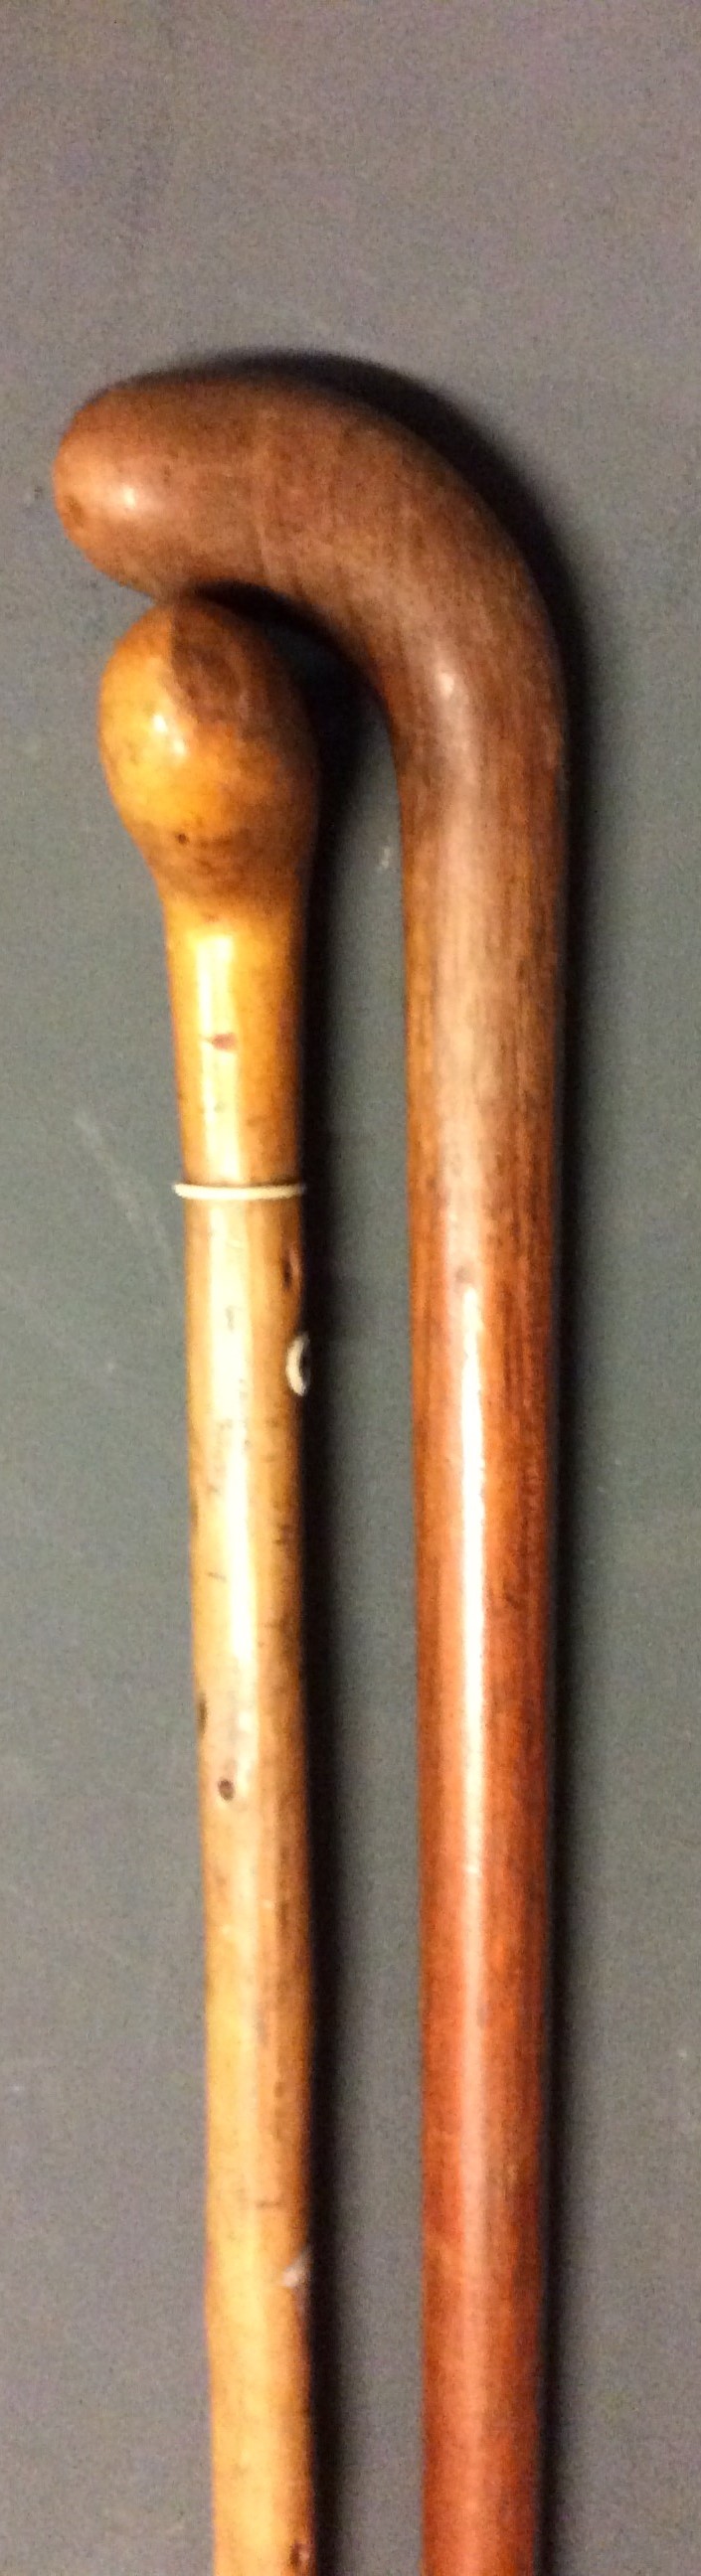 TWO EARLY 20TH CENTURY WALKING STICKS. - Image 2 of 2